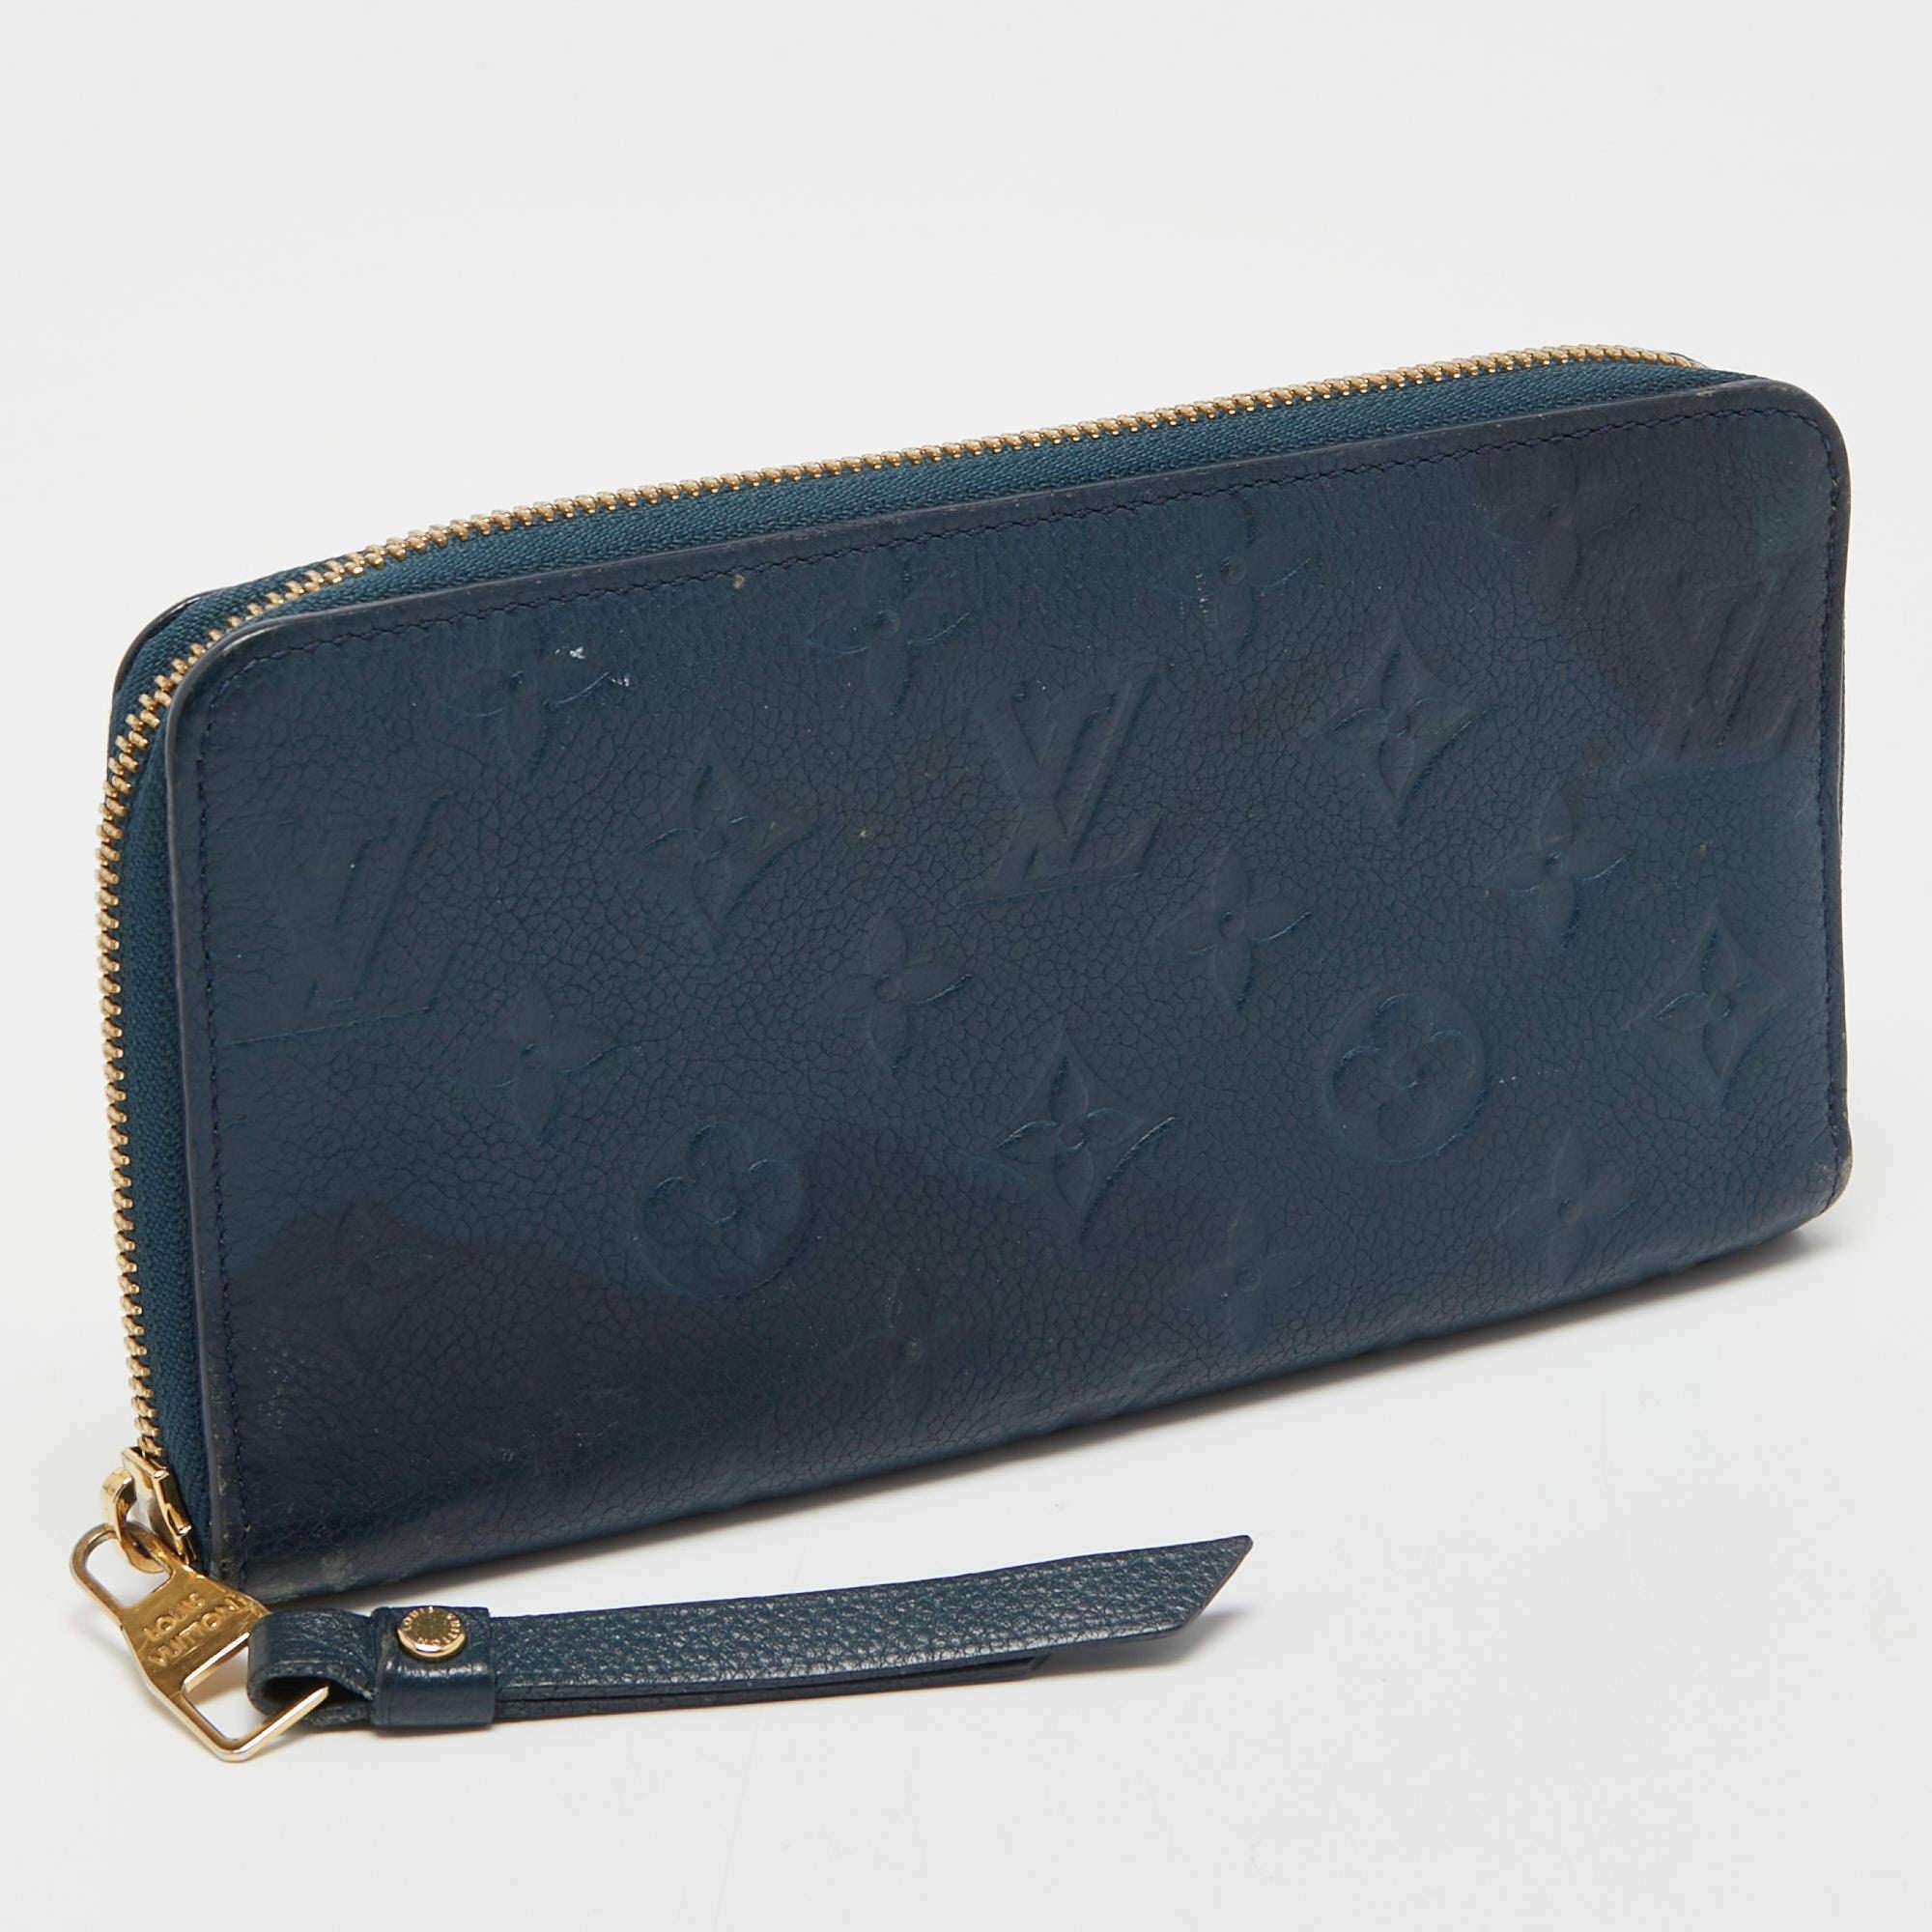 This gorgeous Louis Vuitton wallet is a stylish way to organize your monetary essentials. It features a zip fastening with card slots, compartments, and a zip pocket inside. Made from high-quality Monogram Empreinte leather, it is supple and